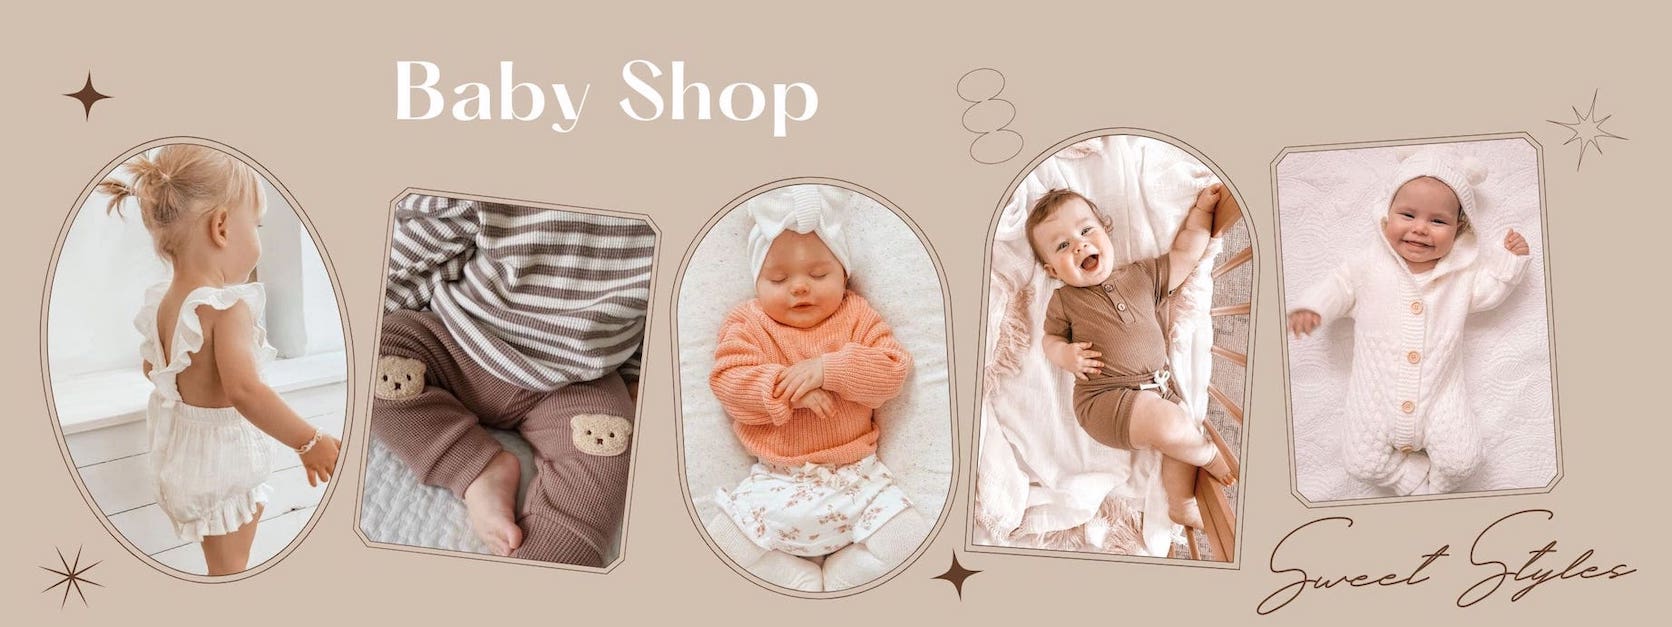 Baby clothes Australia - shop cute styles at Lulu Babe